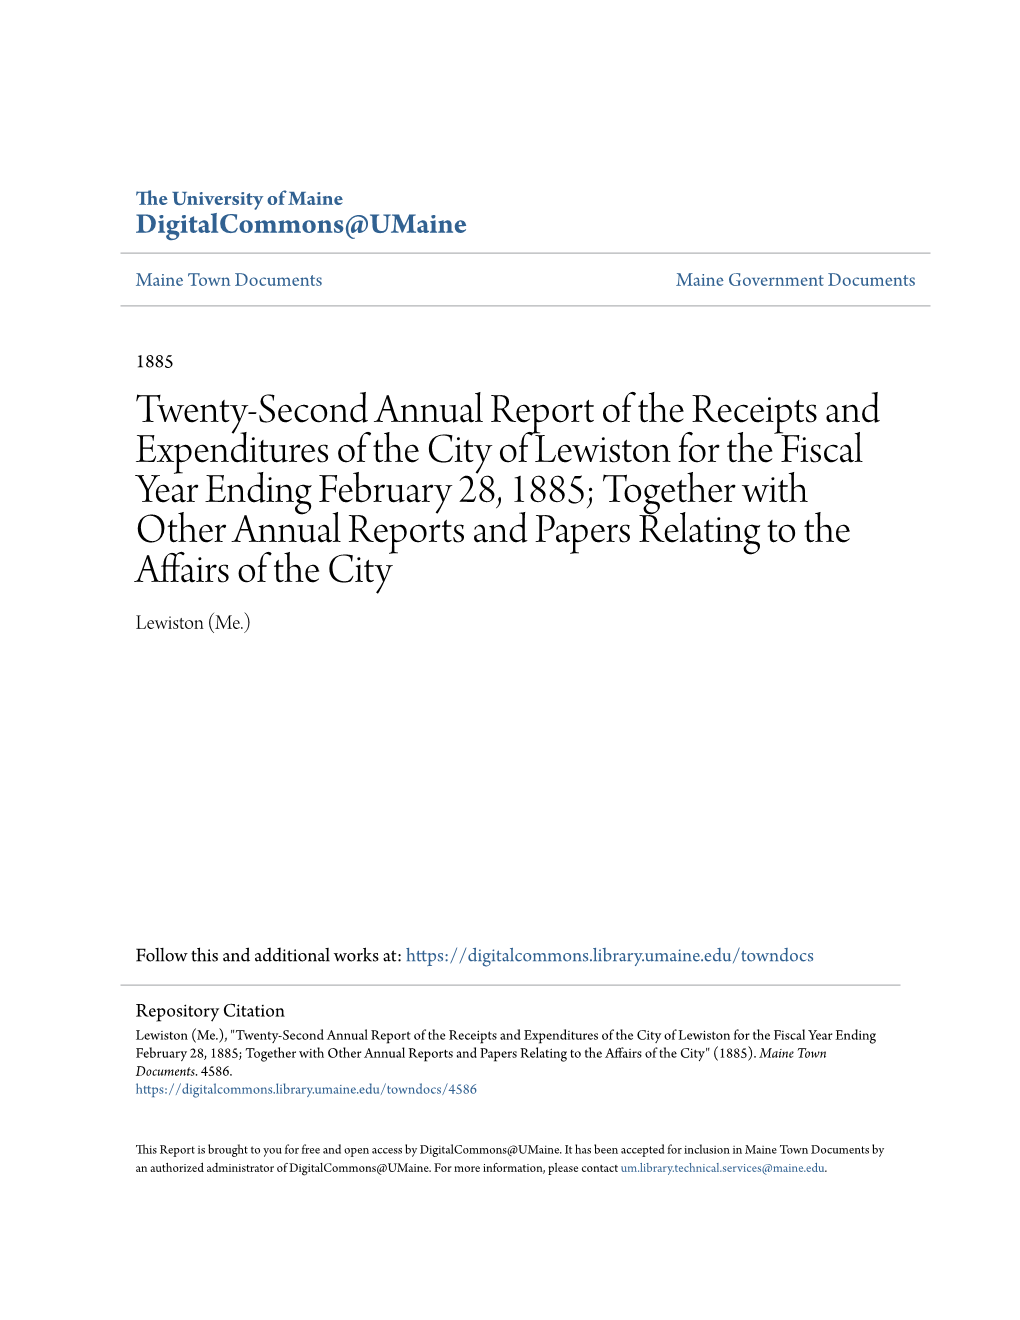 Twenty-Second Annual Report of the Receipts and Expenditures of The